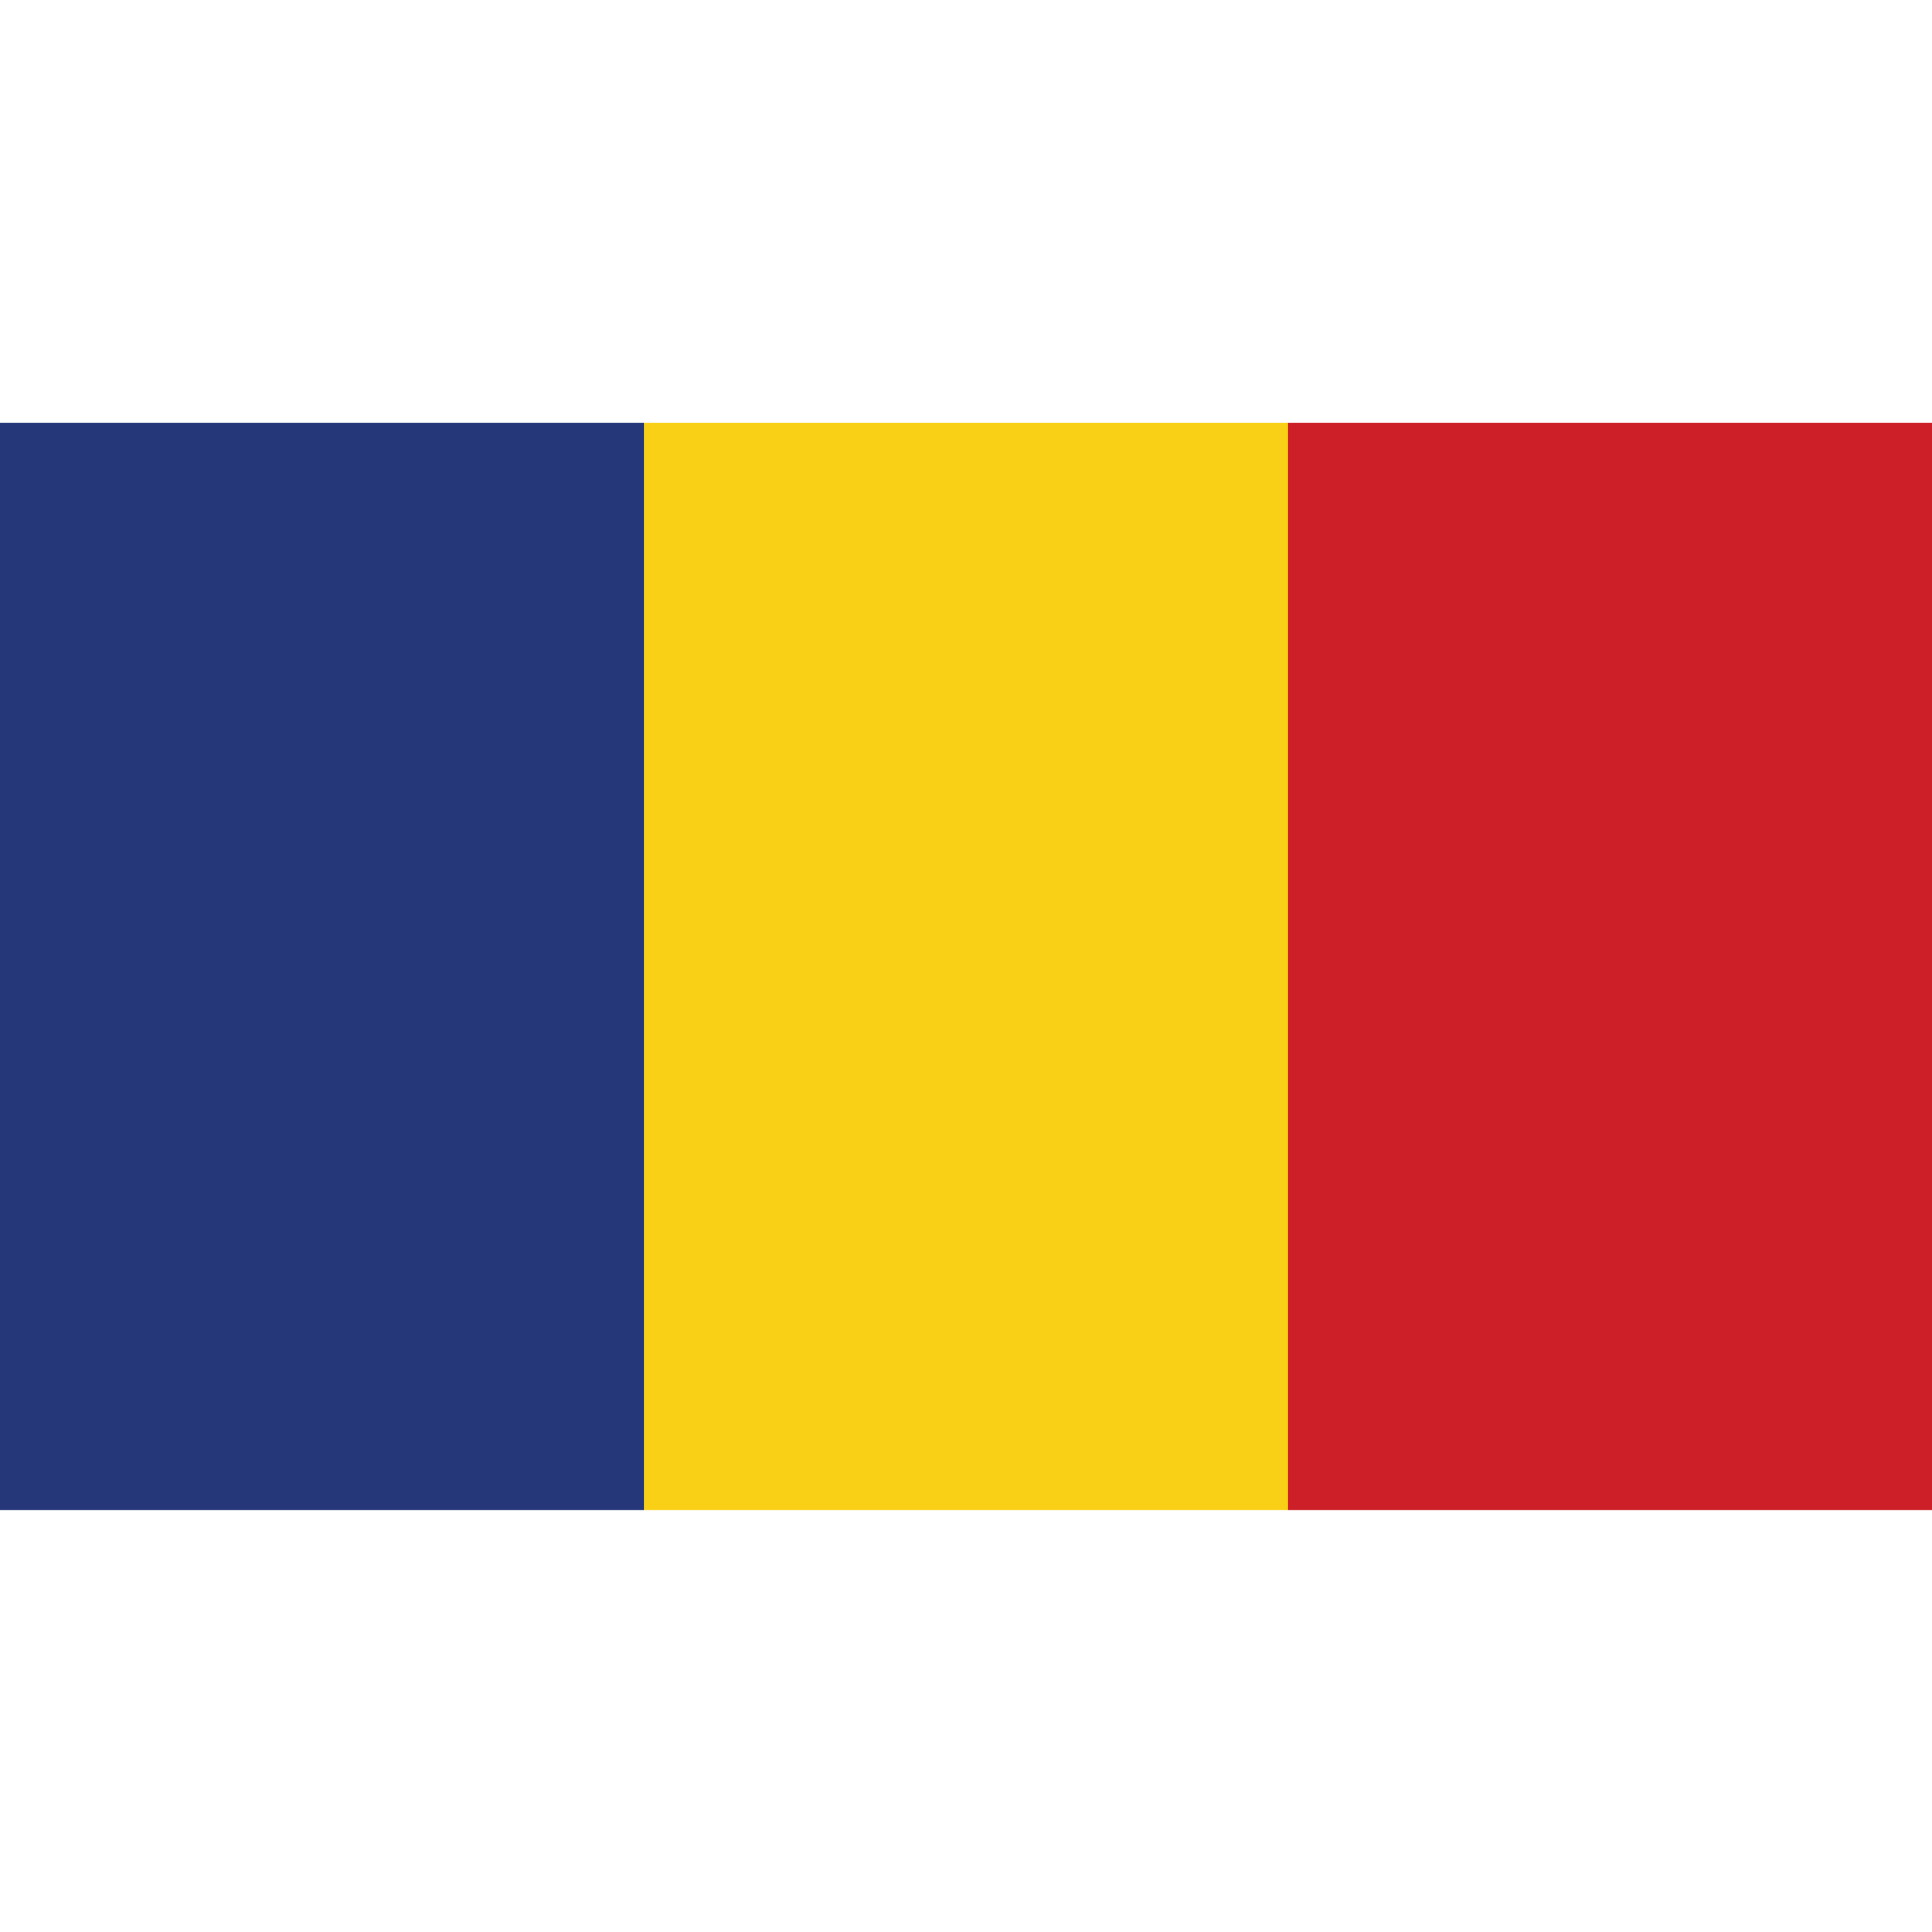 The Romanian flag is a tricolour with three equal vertical bands in blue, yellow and red.